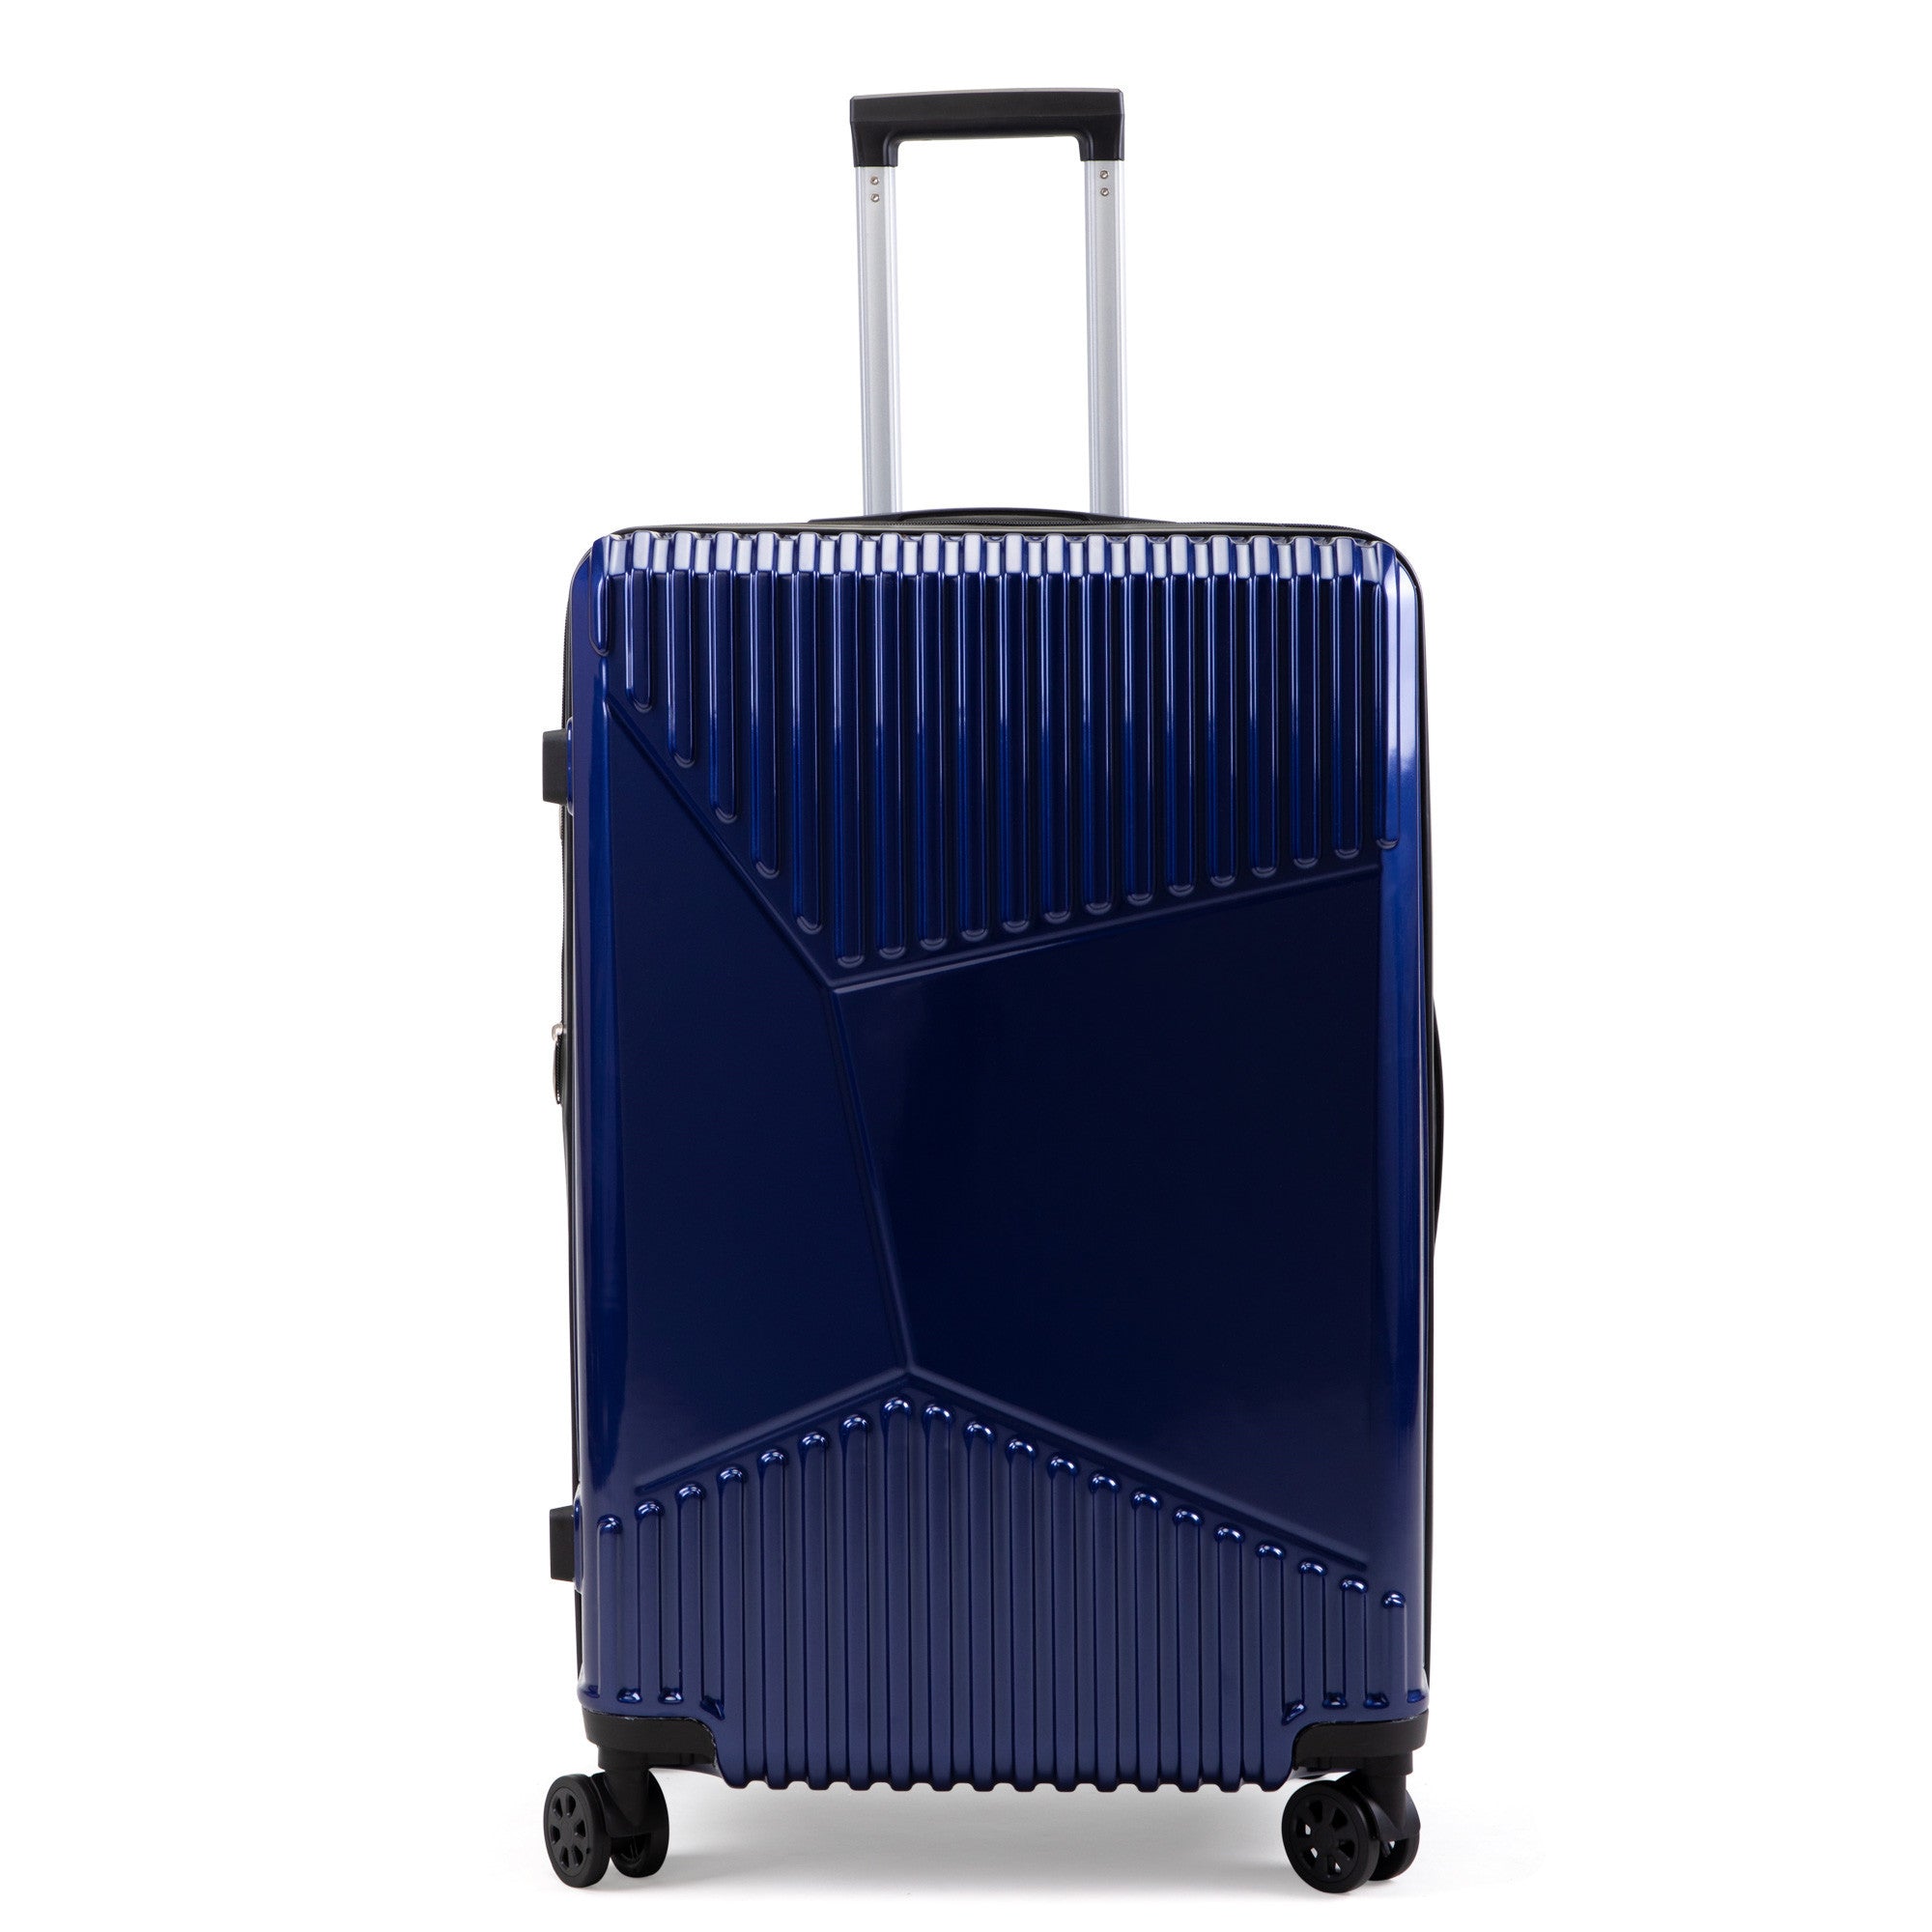 3 Pieces Travel Luggage Set Includes 20 Inches, 24 blue-abs+pc